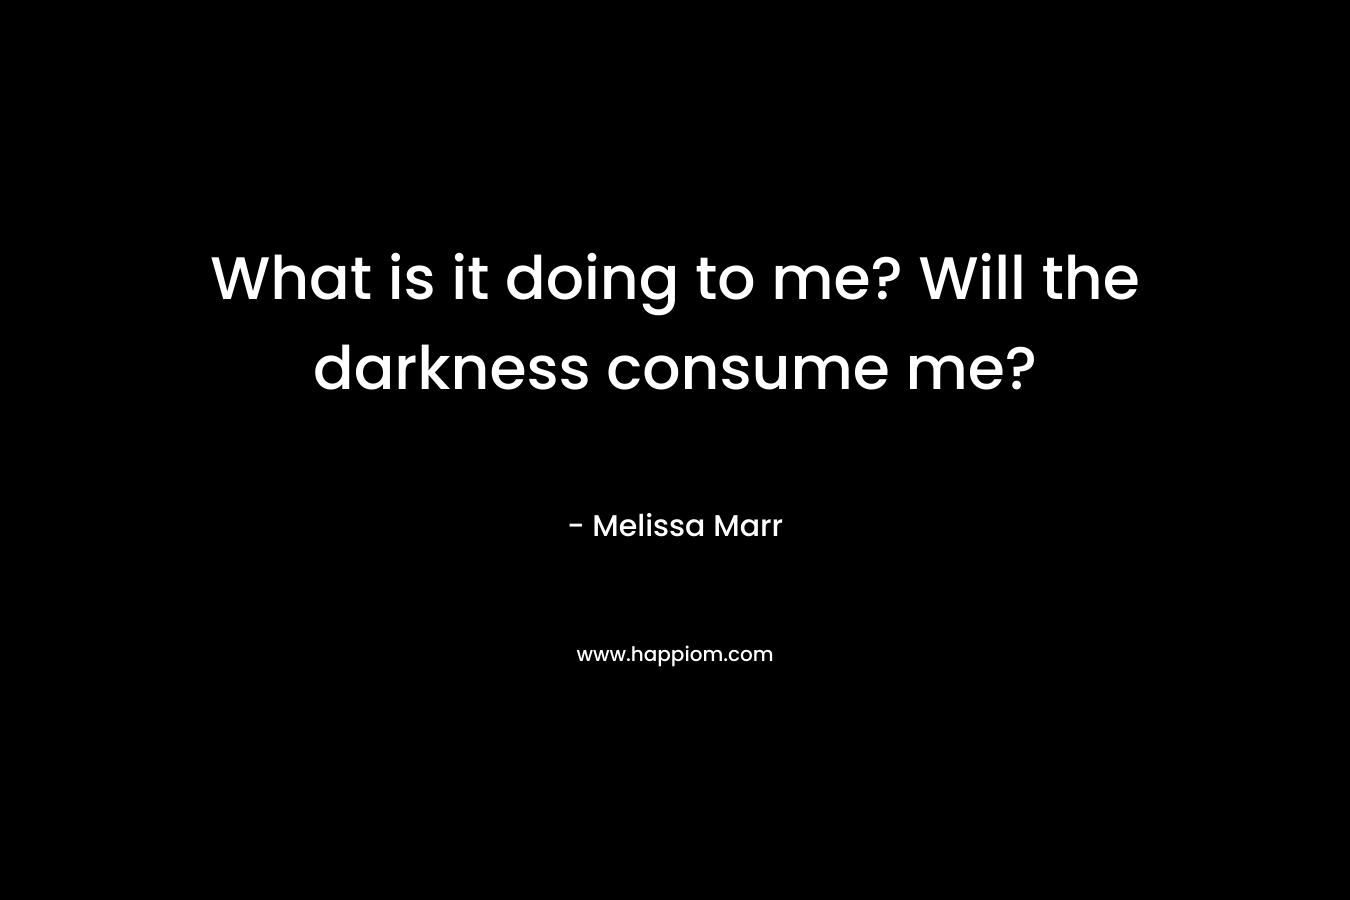 What is it doing to me? Will the darkness consume me? – Melissa Marr